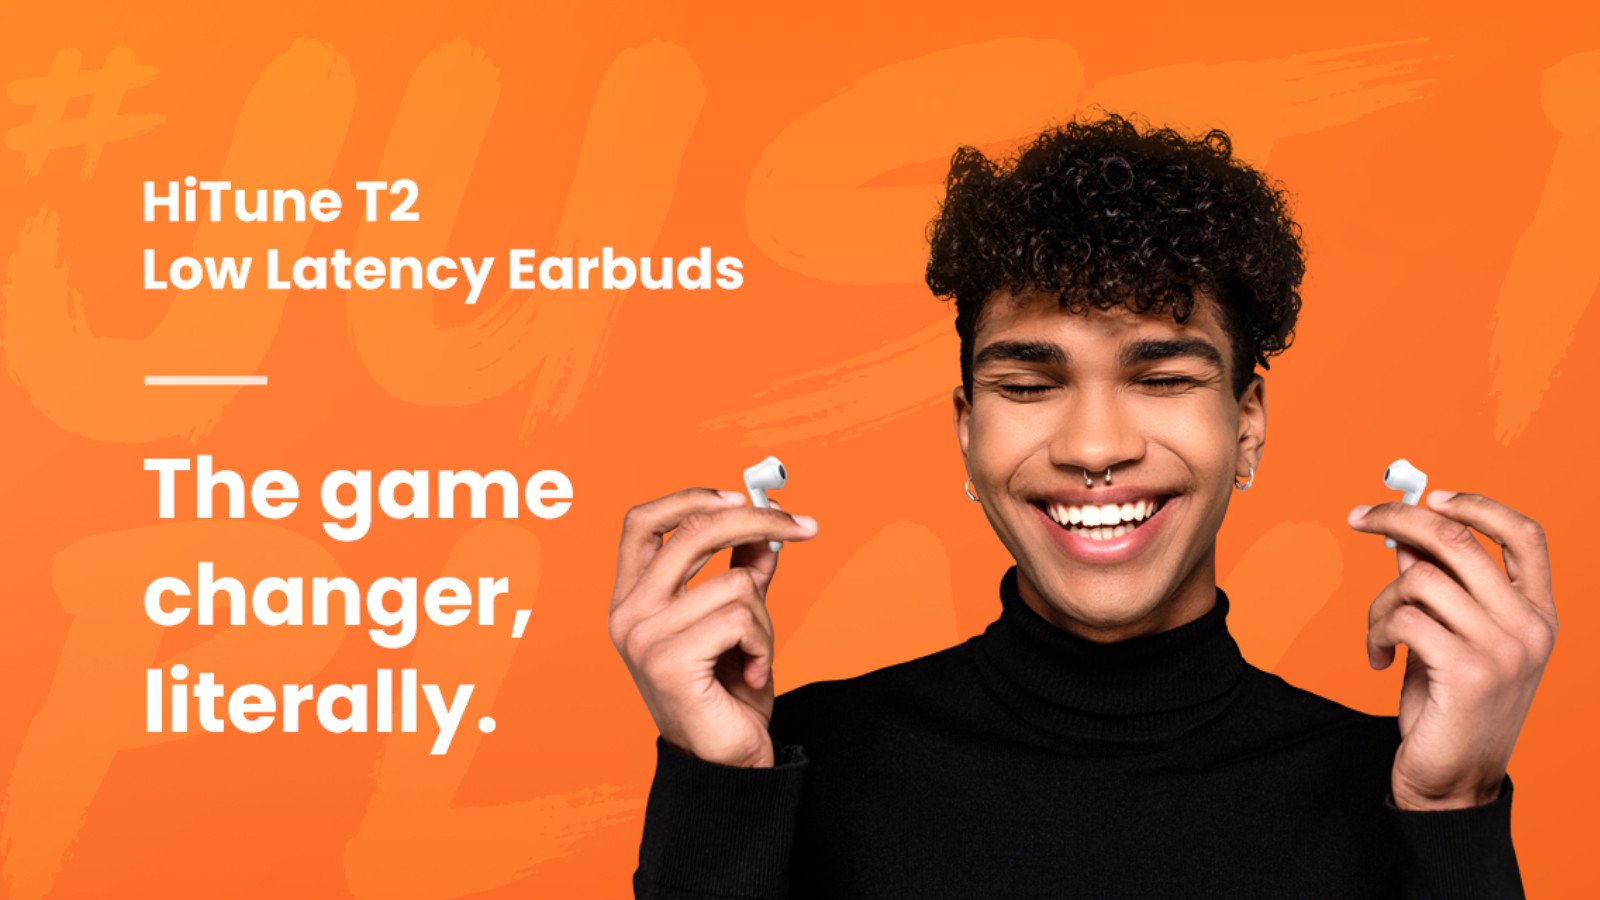 UGREEN’s HiTune T2 earbuds will make you wonder why AirPods cost so much